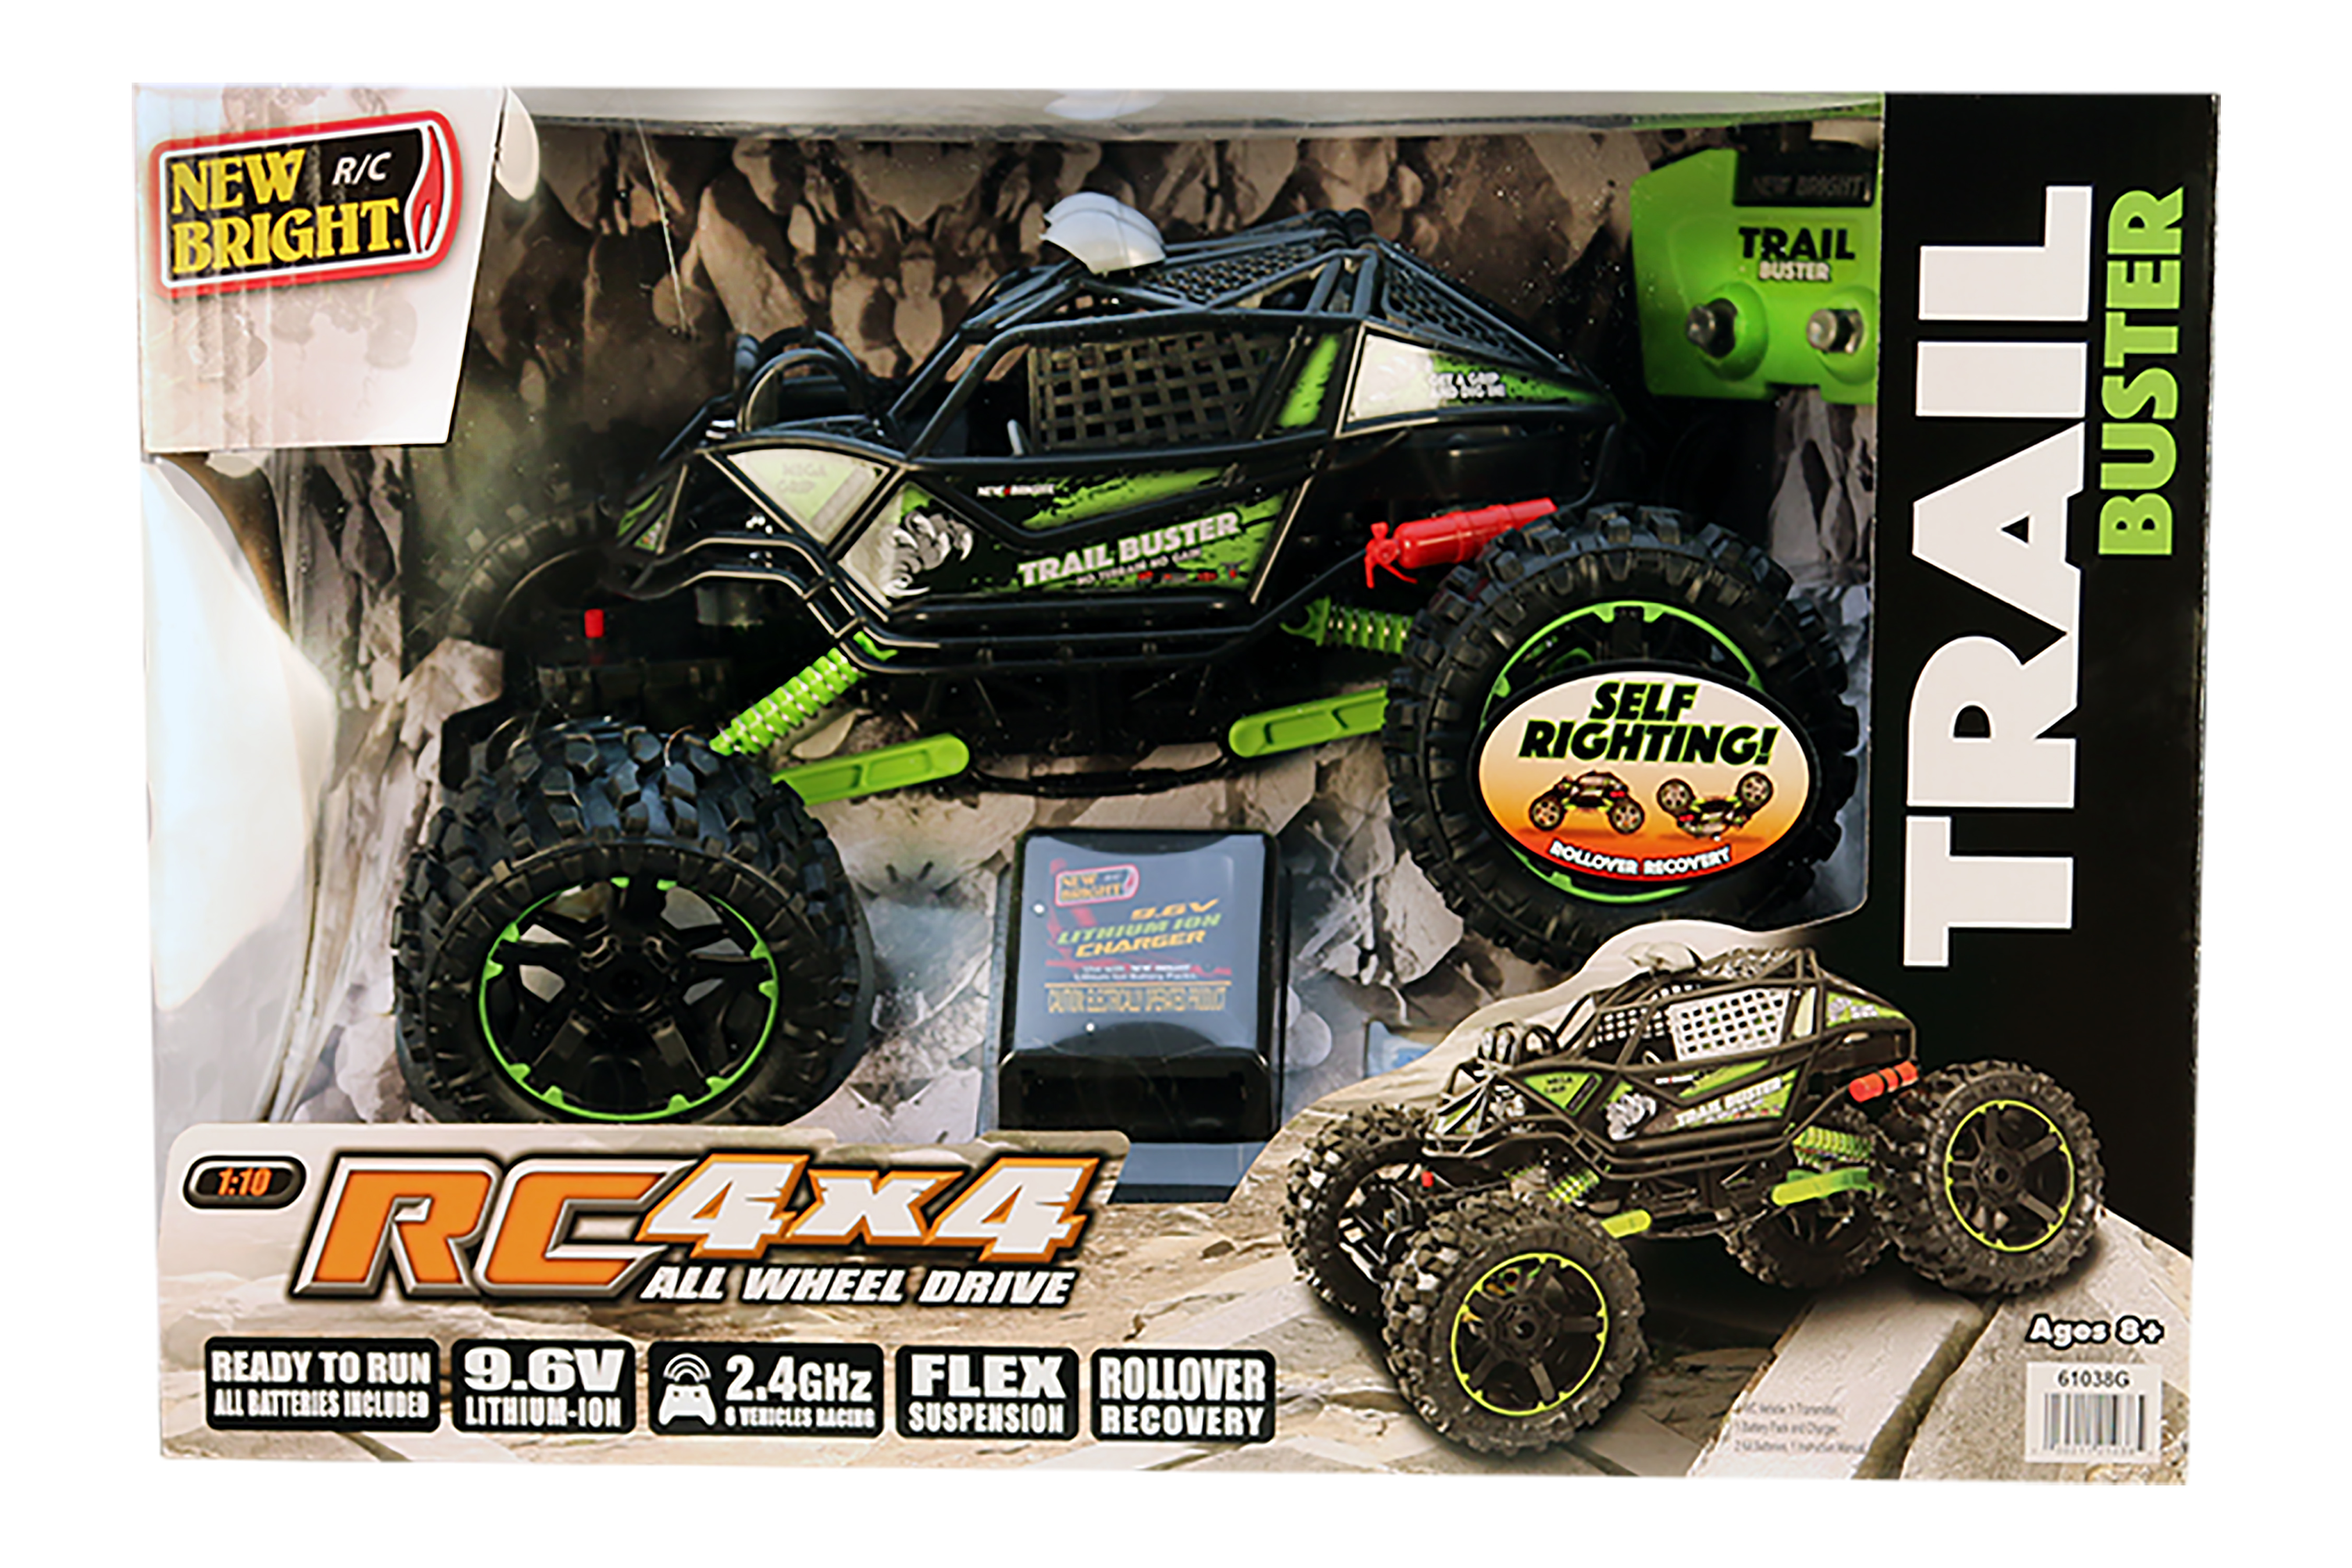 New Bright RC 1:10 Scale 4x4 Radio Control Trail Buster - image 3 of 4